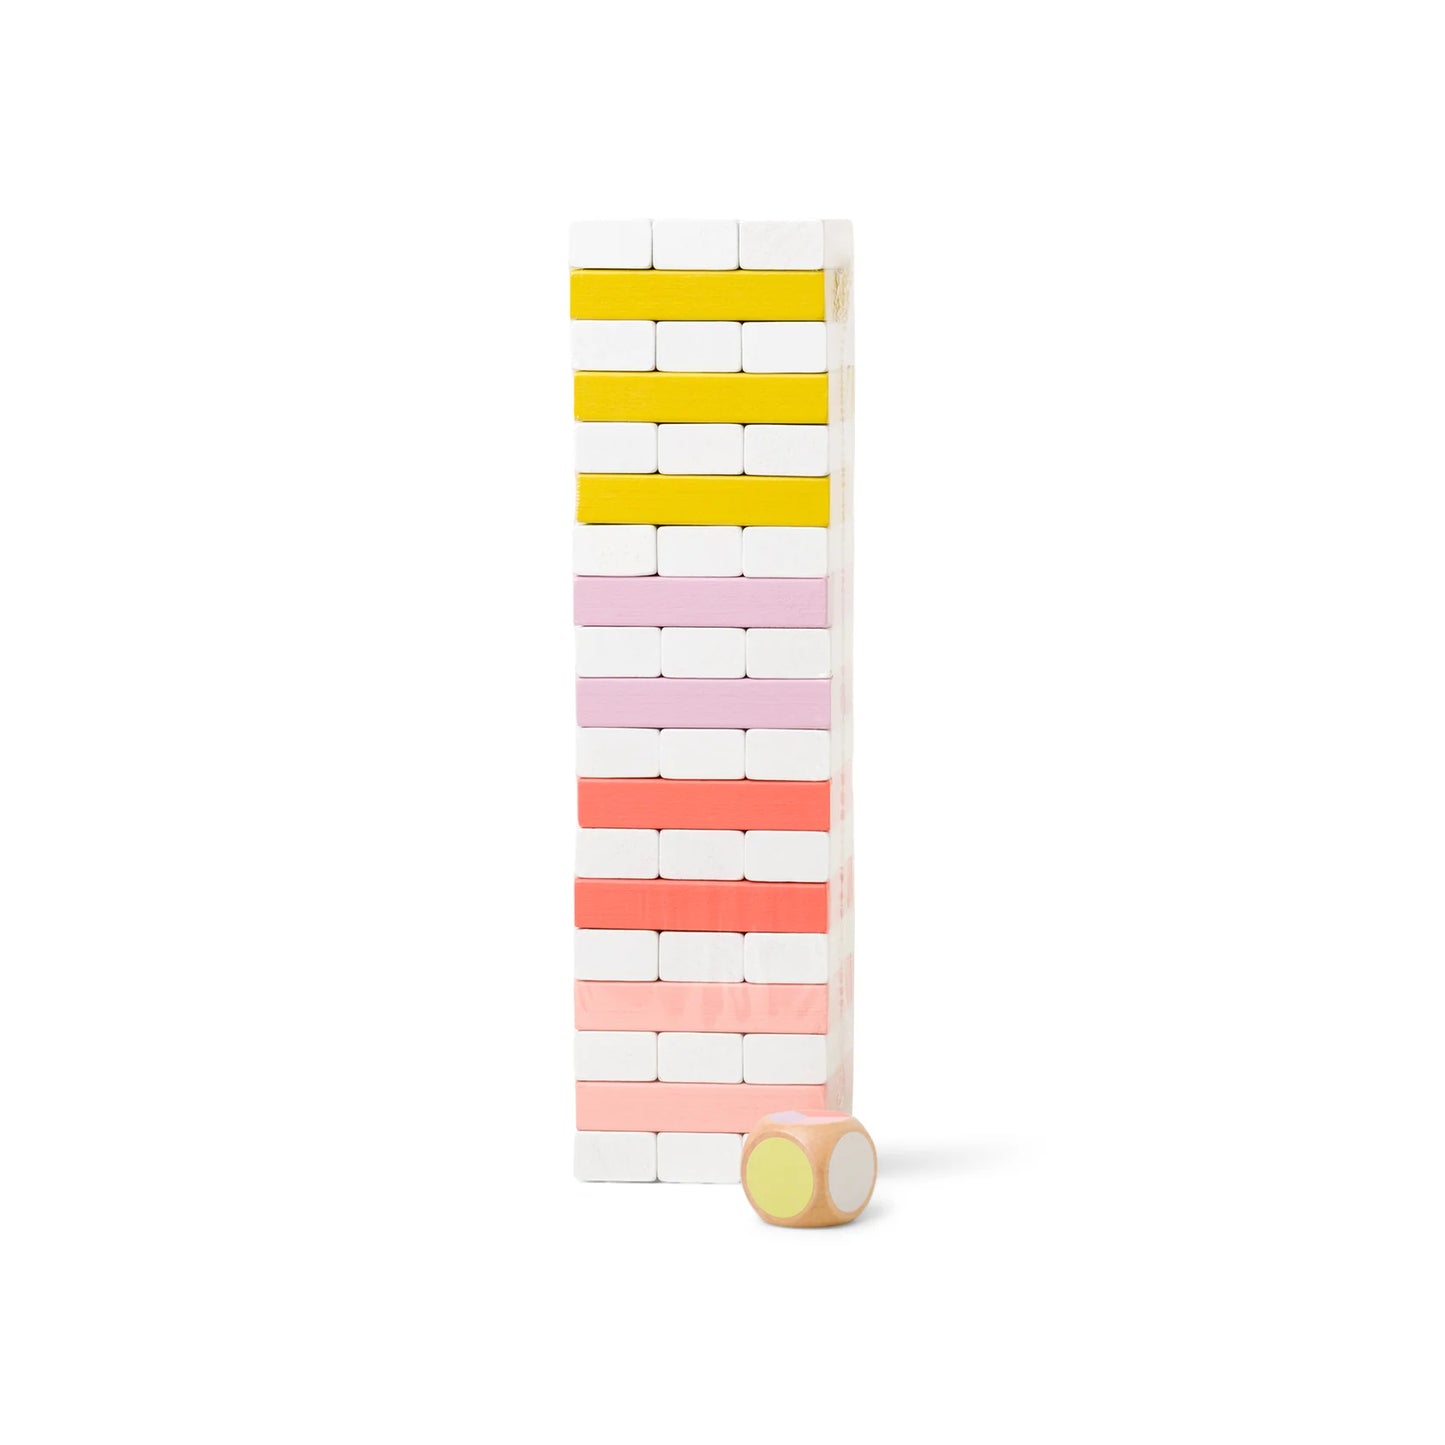 Tumbling Tower Game - Color Pop!